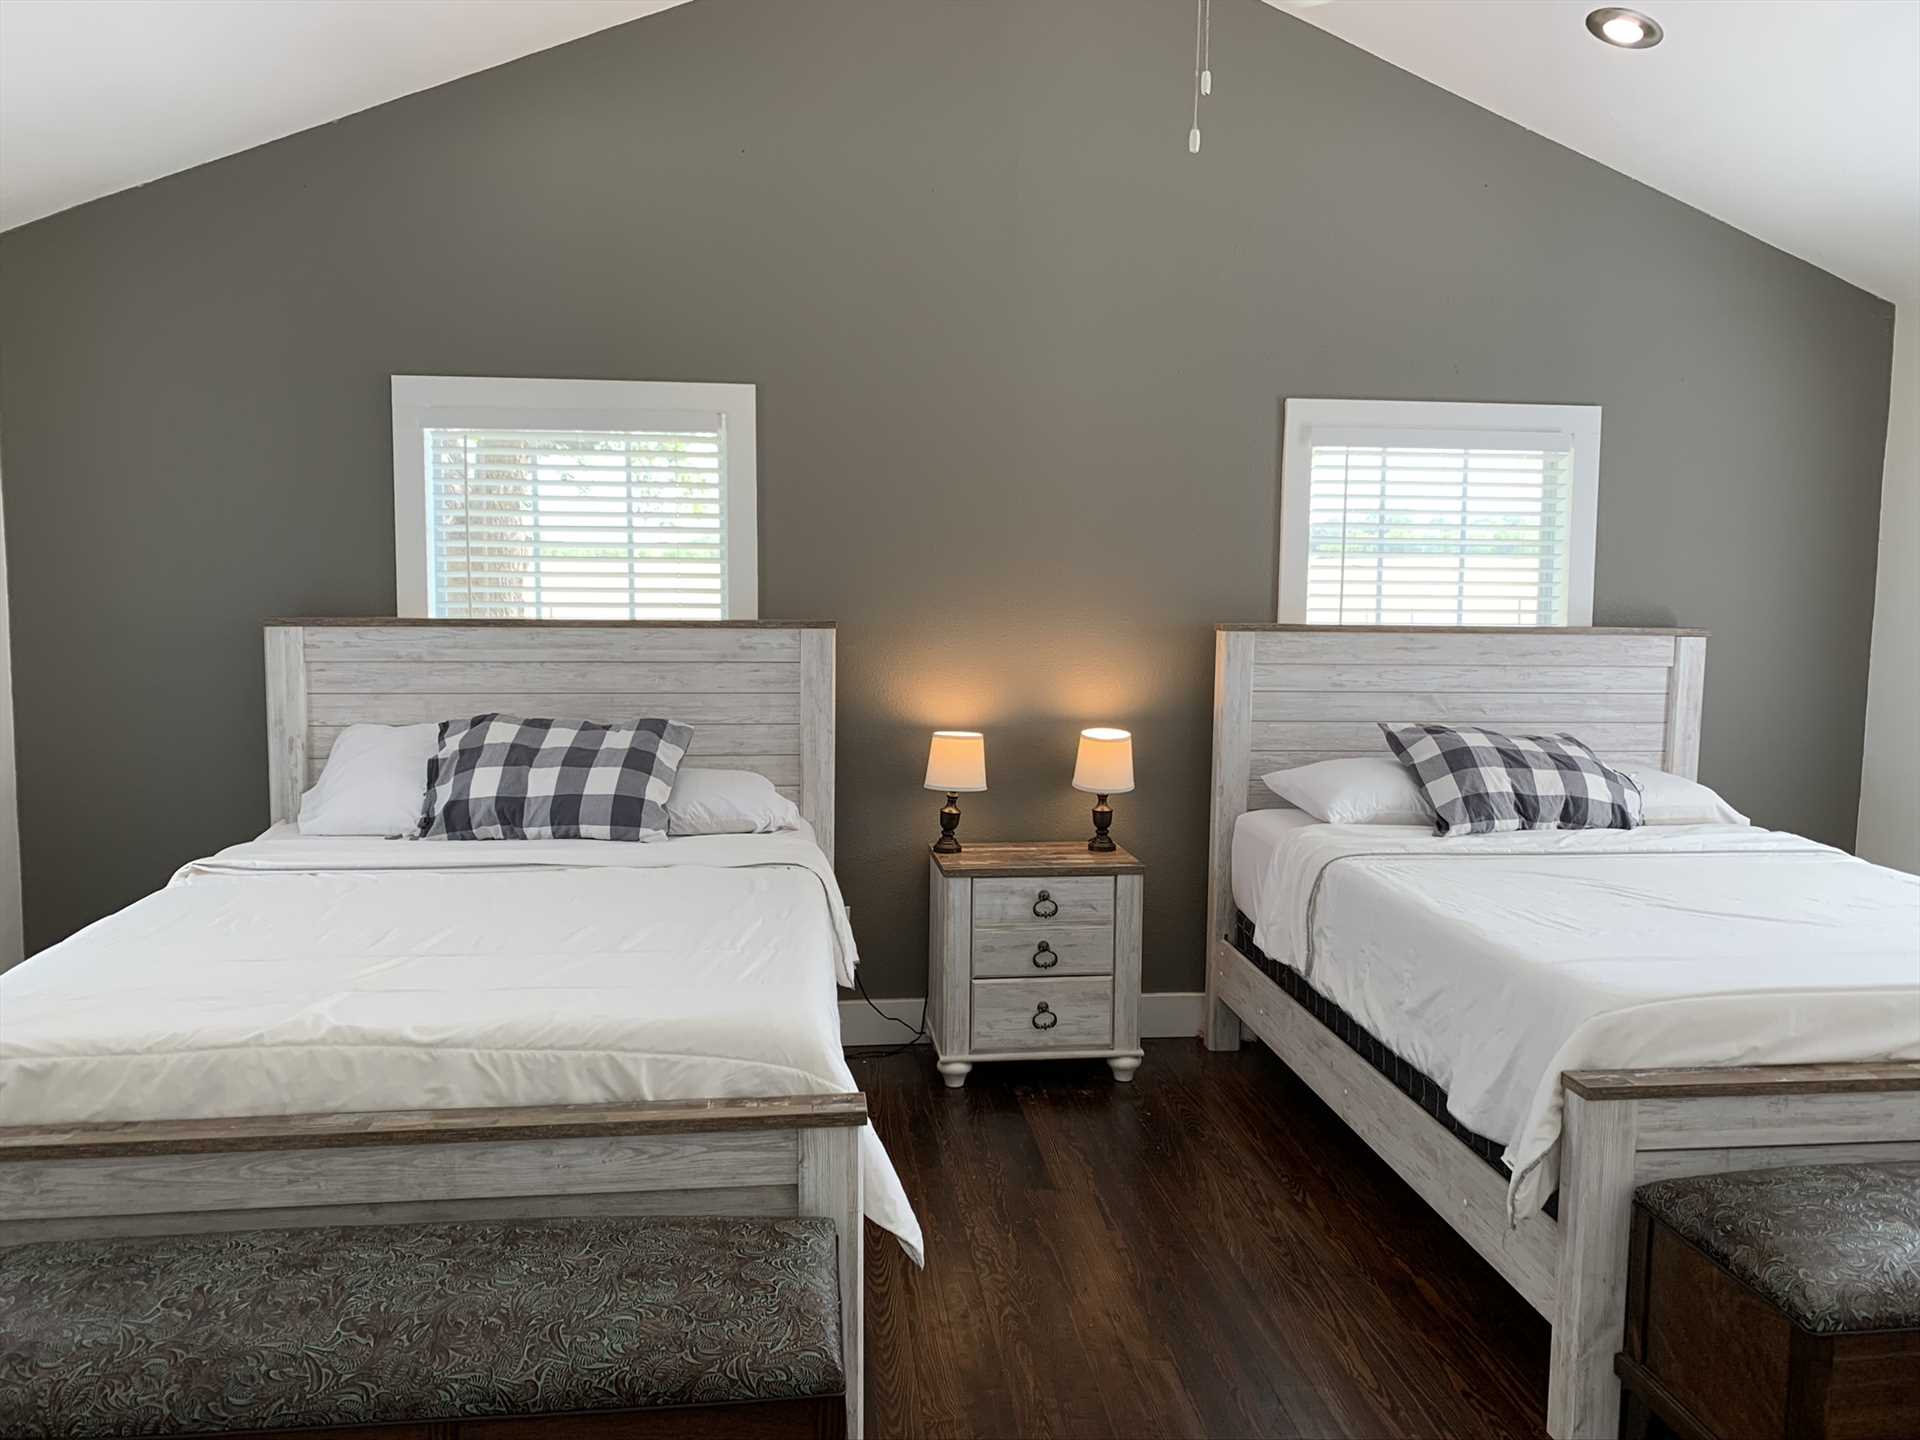                                                 Two nicely-matched queen-sized beds provide luxurious comfort for up to four guests in the second bedroom. All told, the Retreat sleeps up to six.